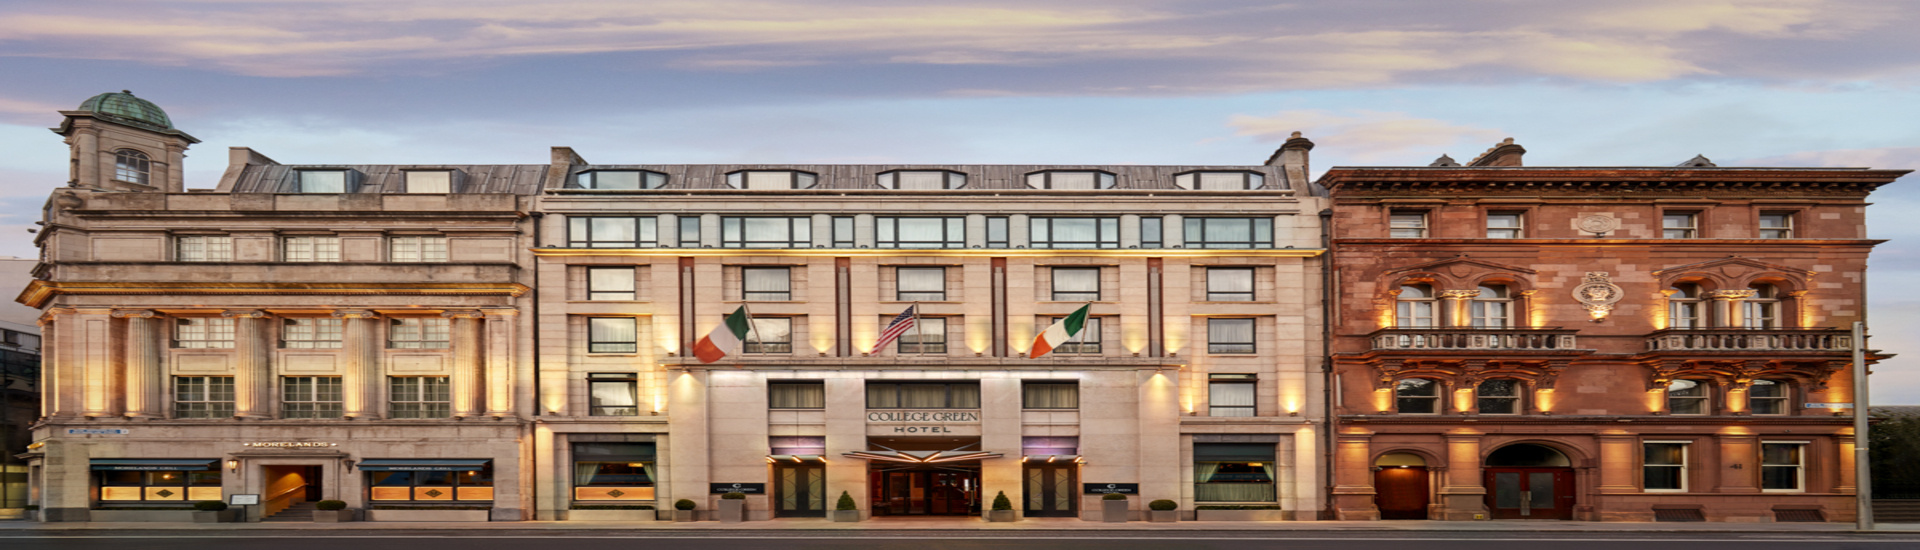 Stay at The Westin Dublin for two nights at 15% off BAR and stay 3 nights at 20% off BAR